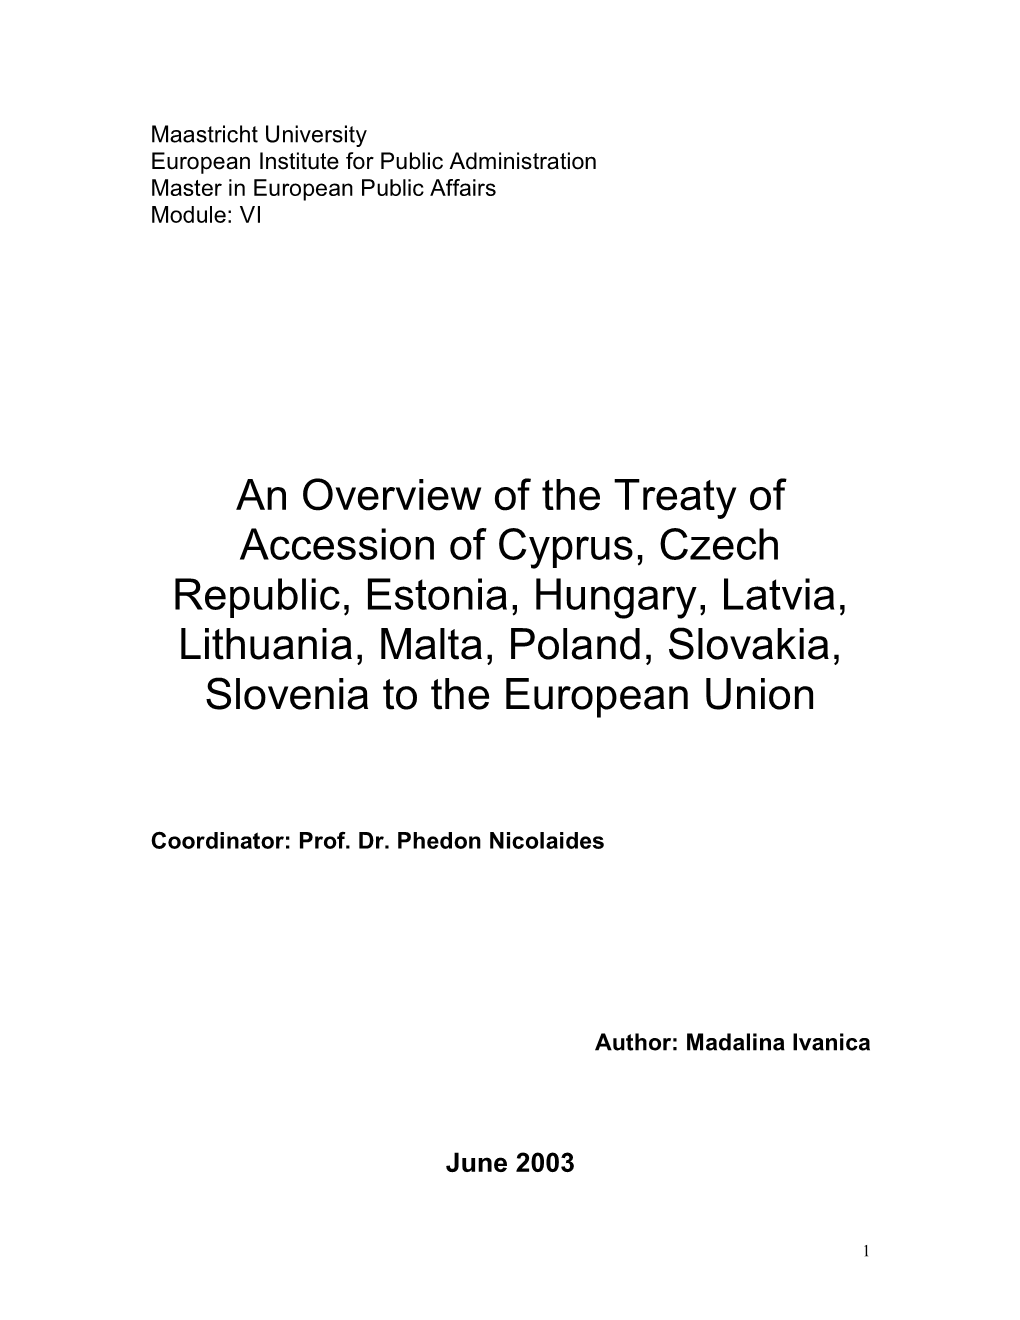 An Overview of the Treaty of Accession of the 10 Candidate Countries